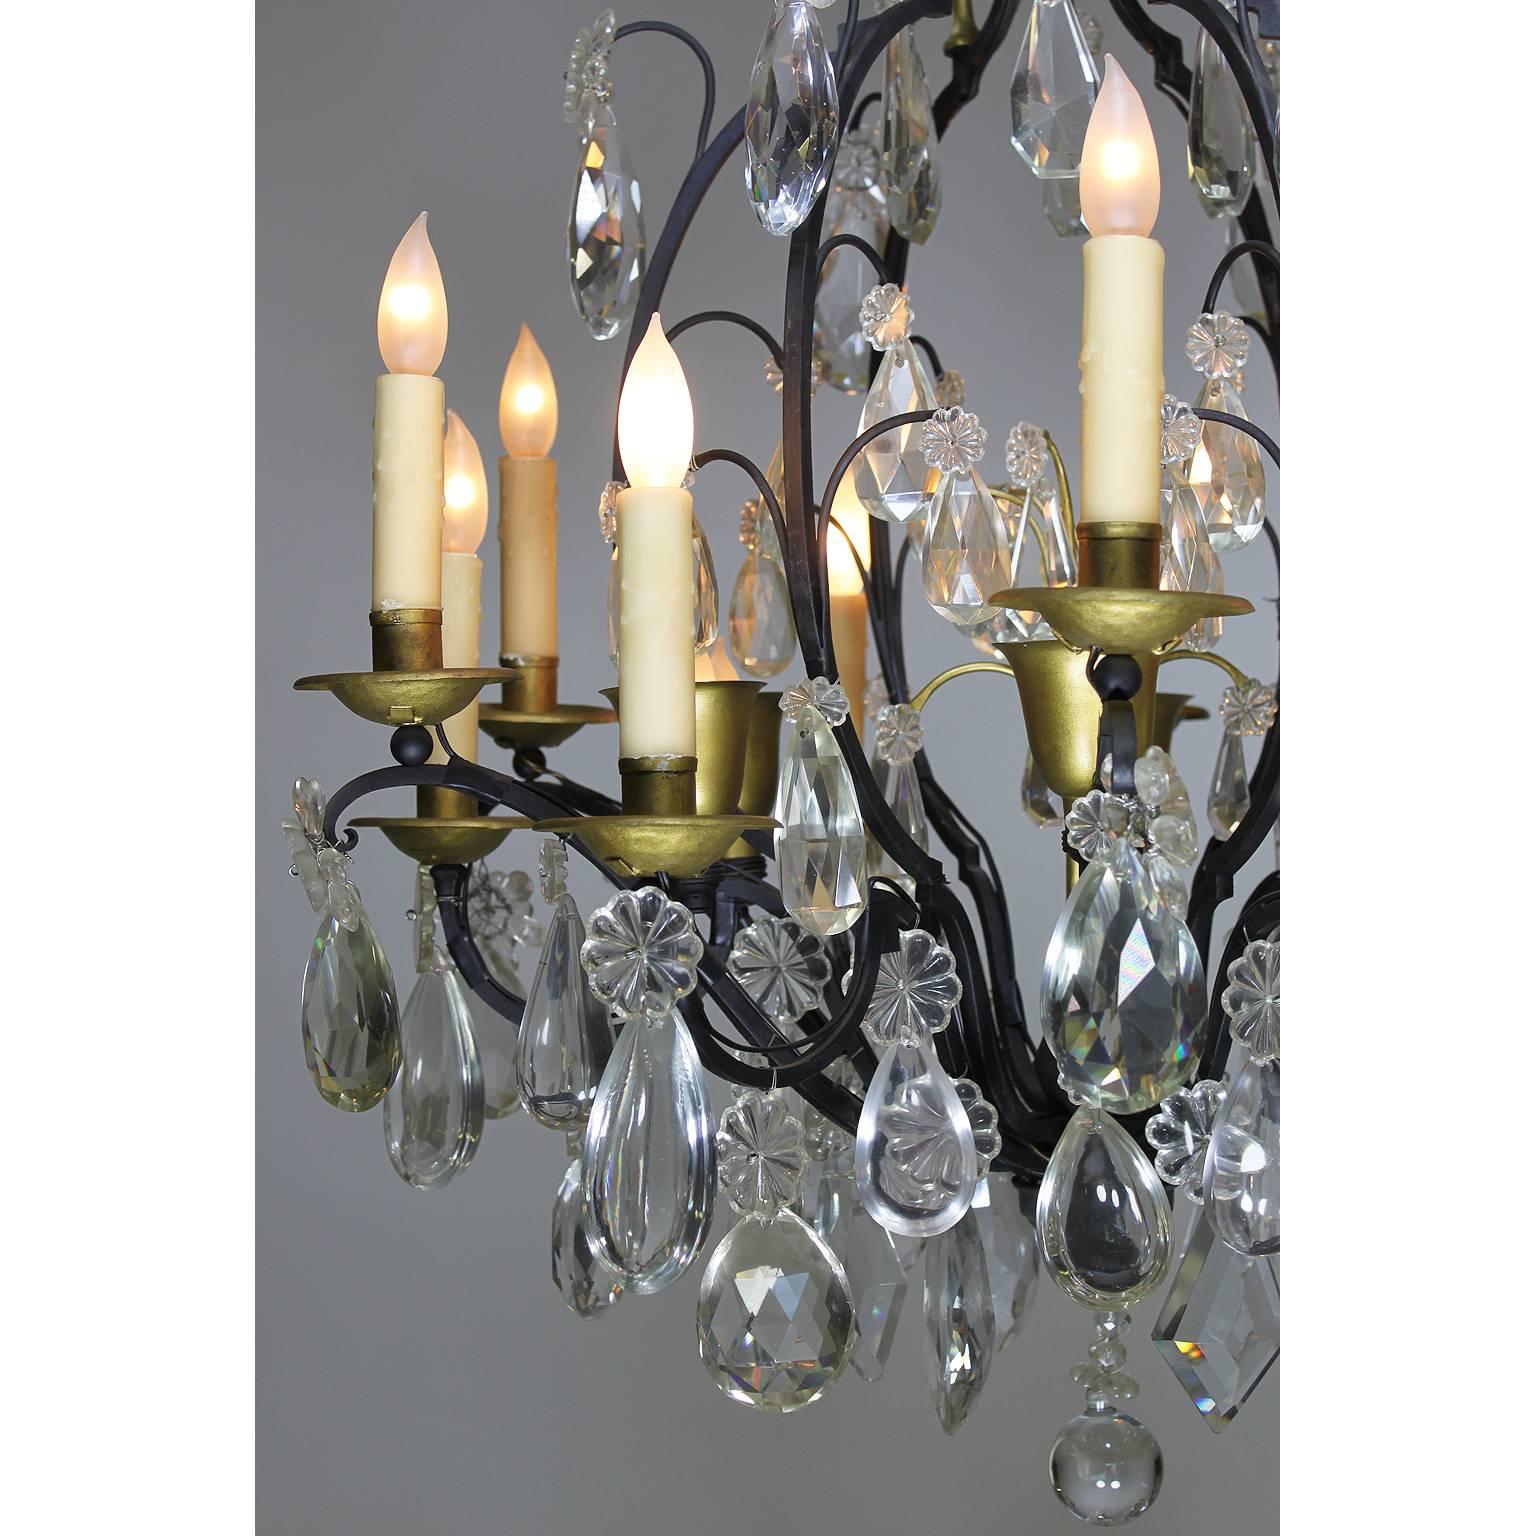 Carved 19th-20th Century Louis XV Style Wrought Iron Eighteen-Light Crystal Chandelier For Sale